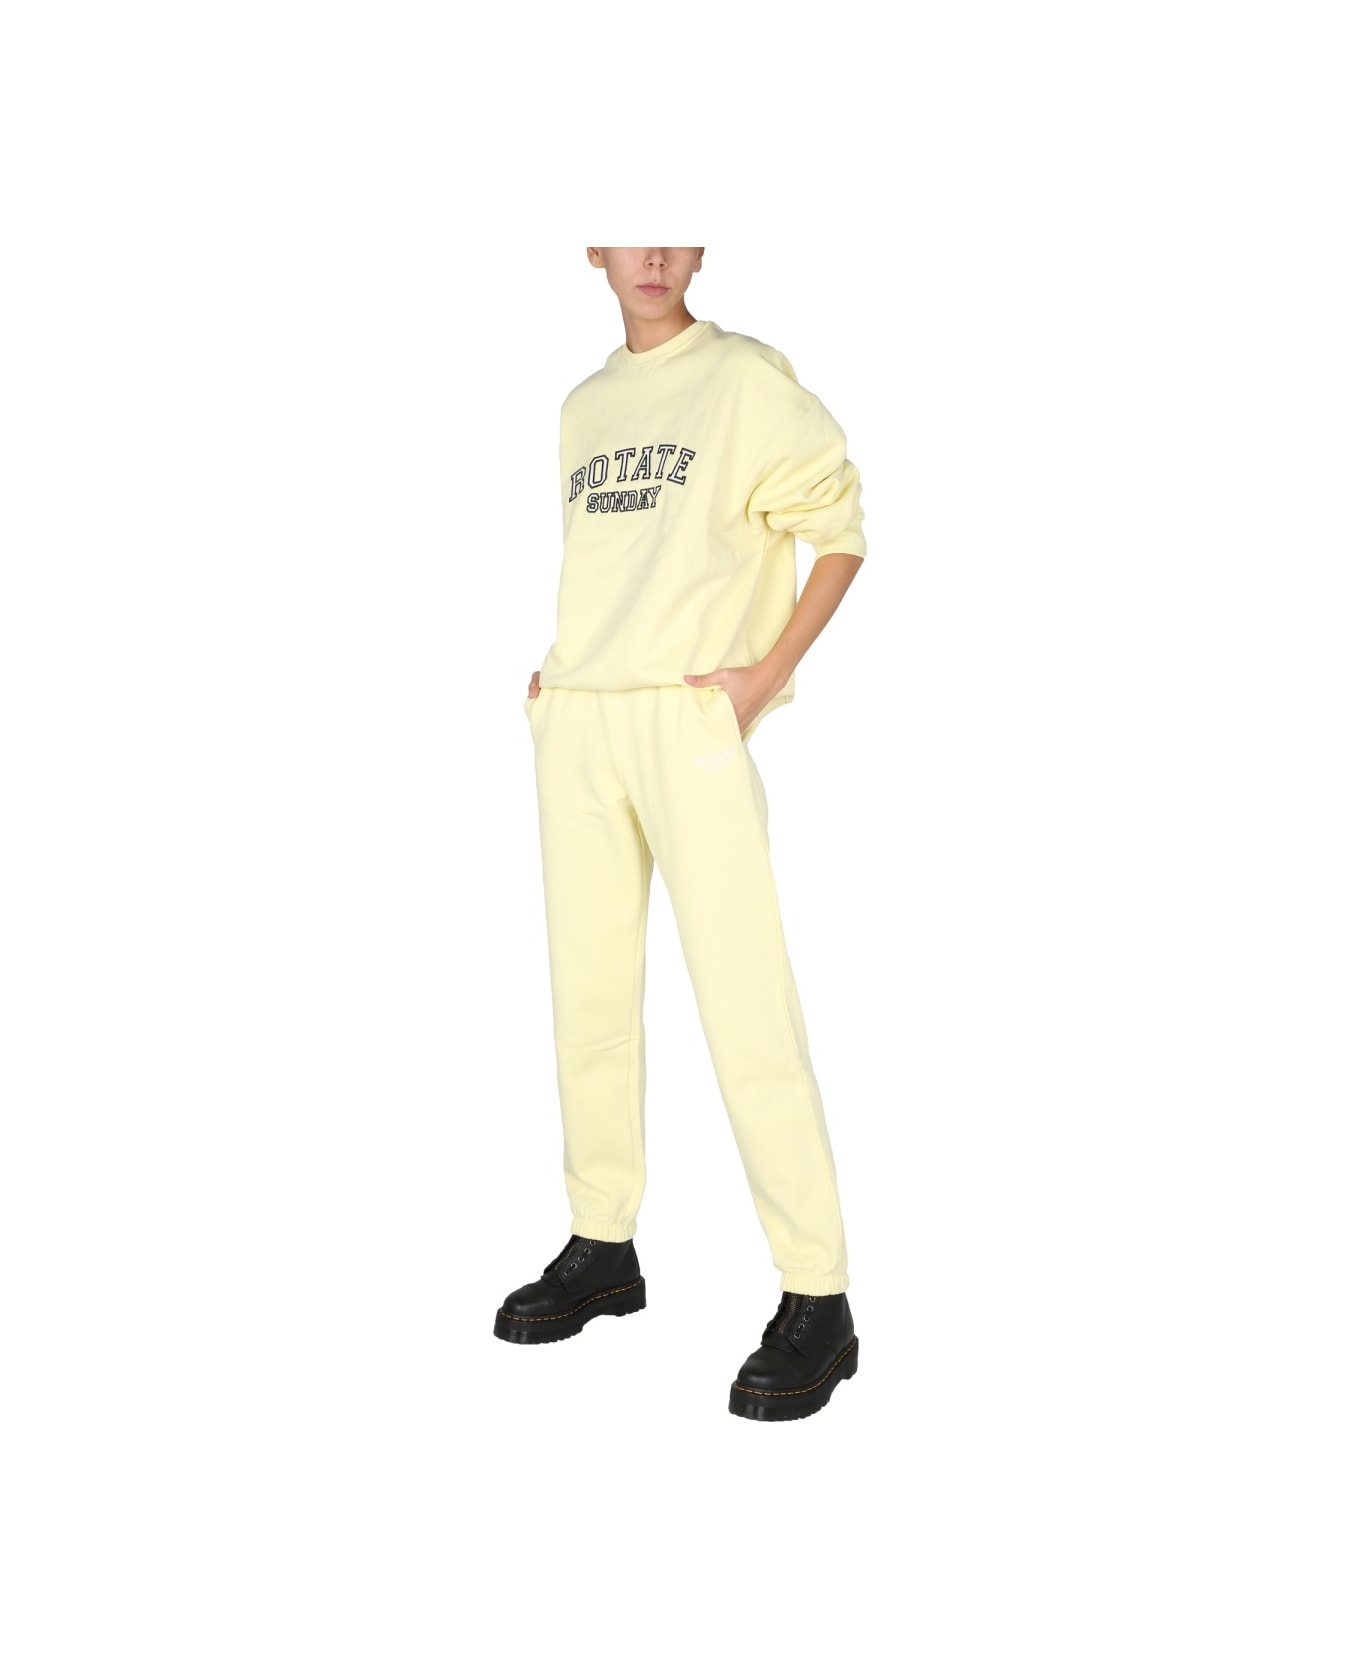 Rotate by Birger Christensen "mimi" Jogging Trousers - YELLOW